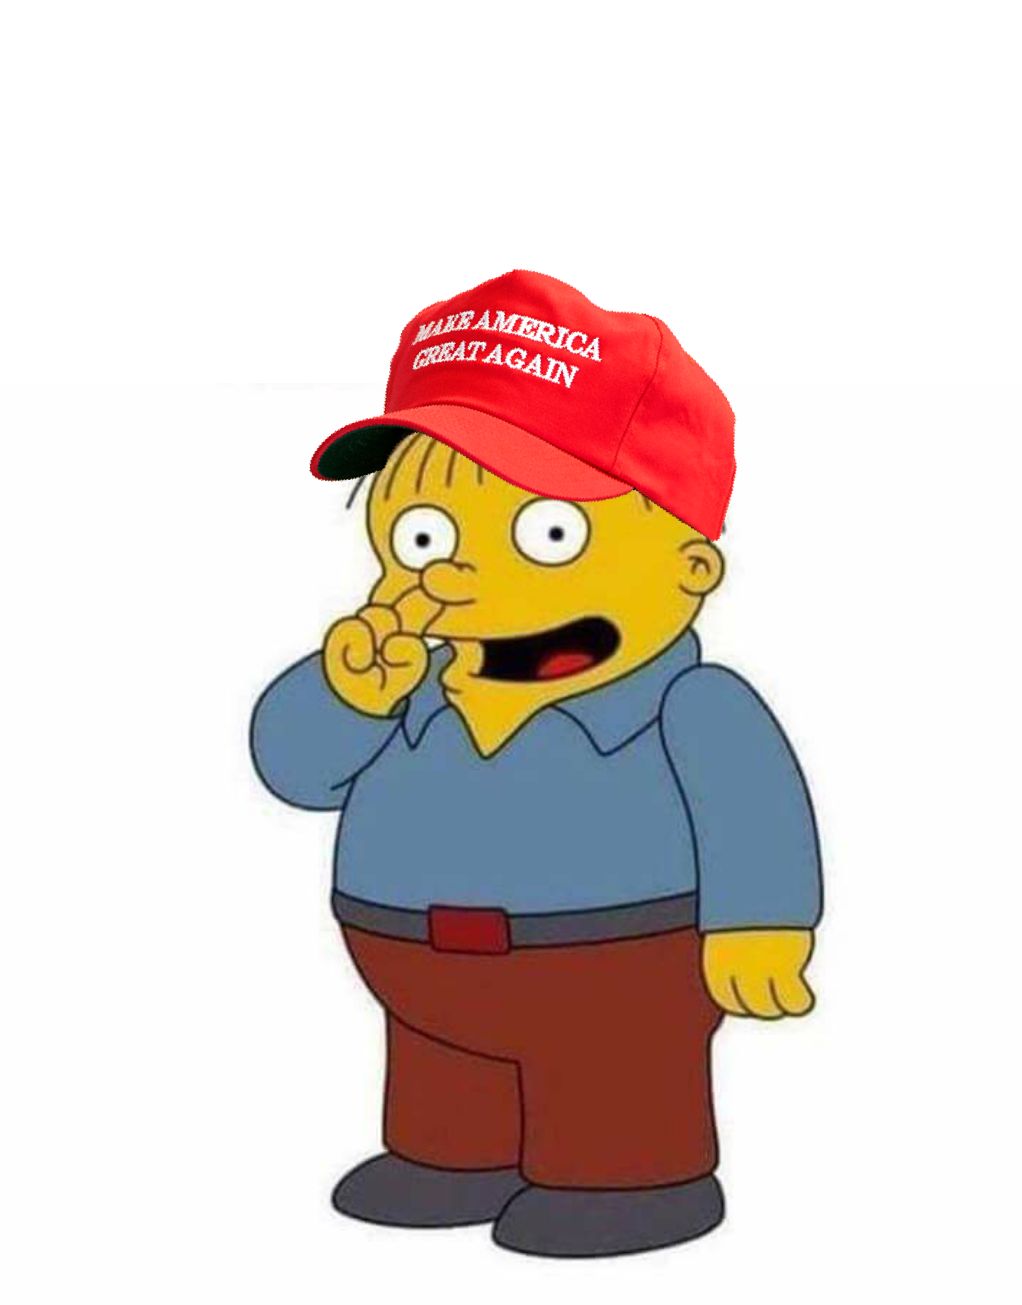 Ralph from The Simpsons Memes - Imgflip.